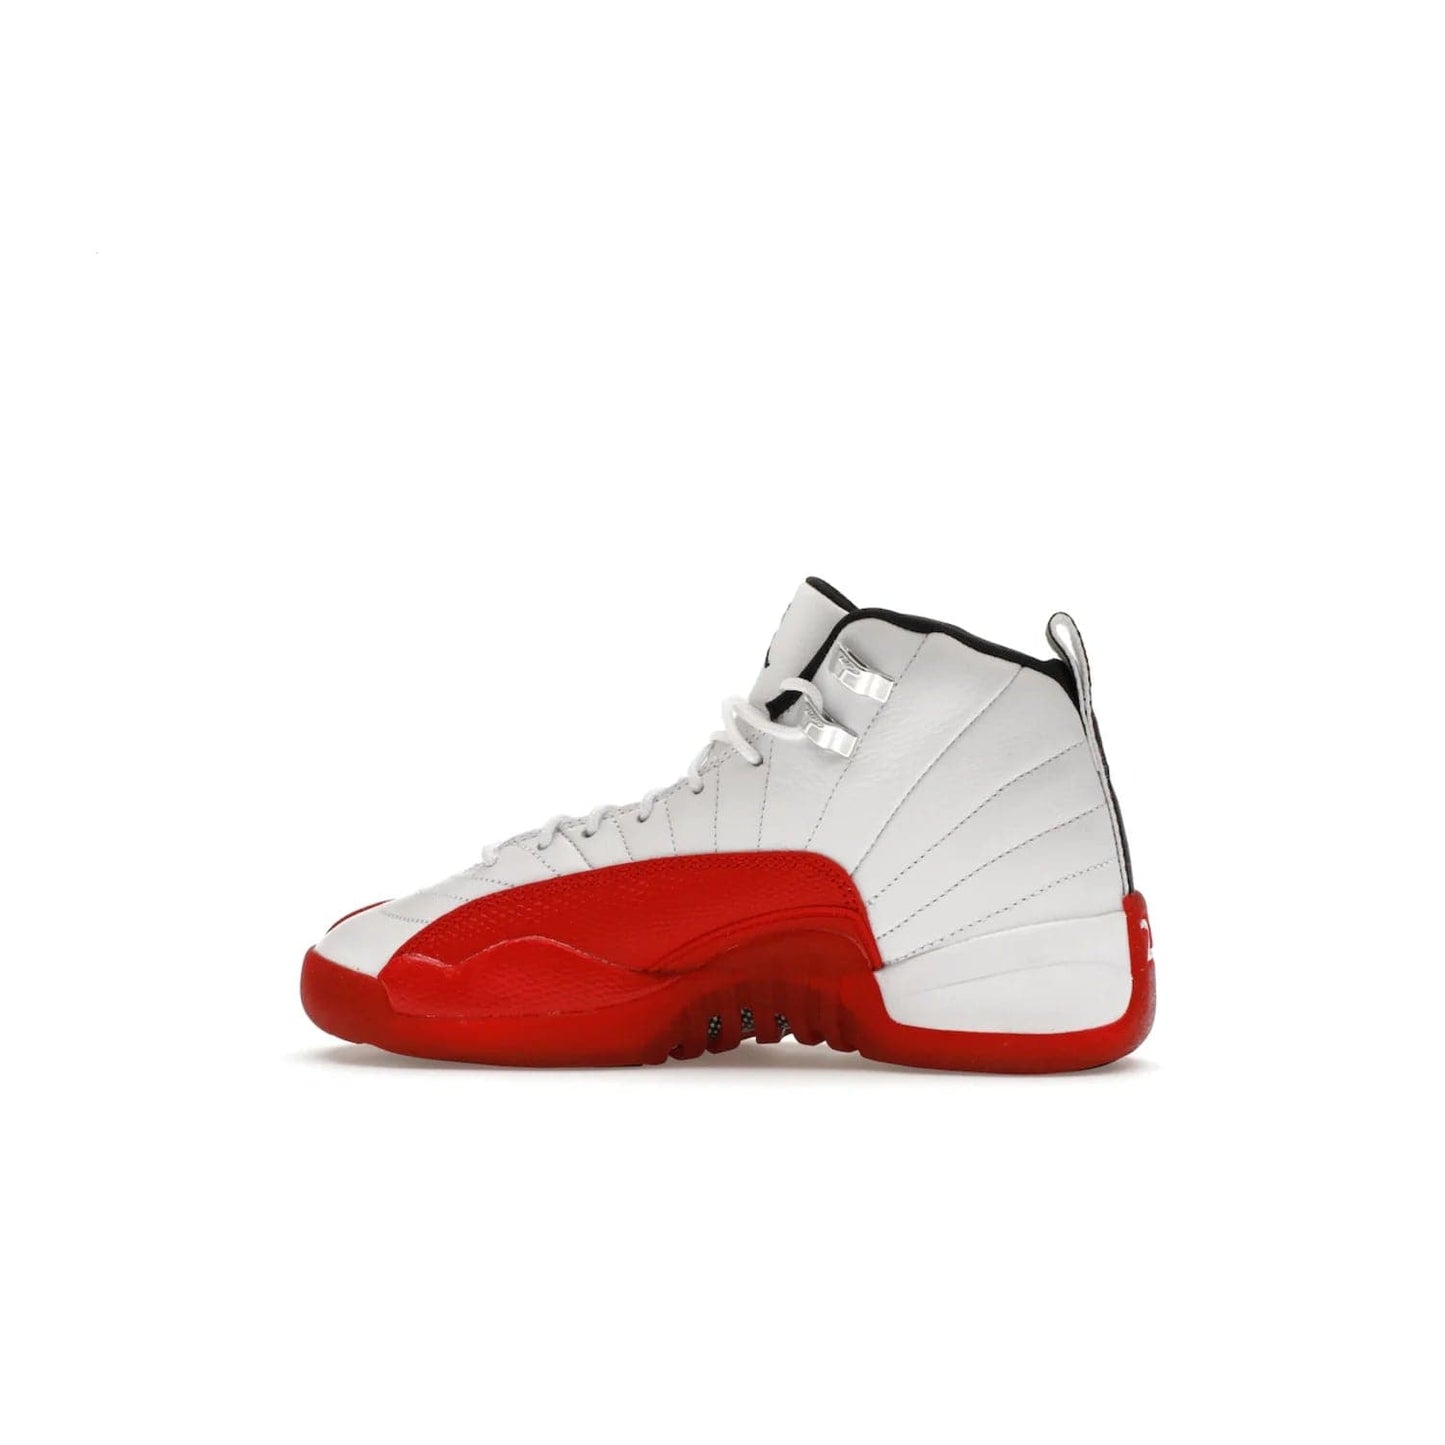 Jordan 12 Retro Cherry (2023) (GS) - Image 20 - Only at www.BallersClubKickz.com - Grab the Jordan 12 Retro Cherry (2023) (GS) and show off your signature style with these iconic kicks. Dressed in White, Black and Varsity Red, these timeless kicks are sure to turn heads. Available October 28, 2023.